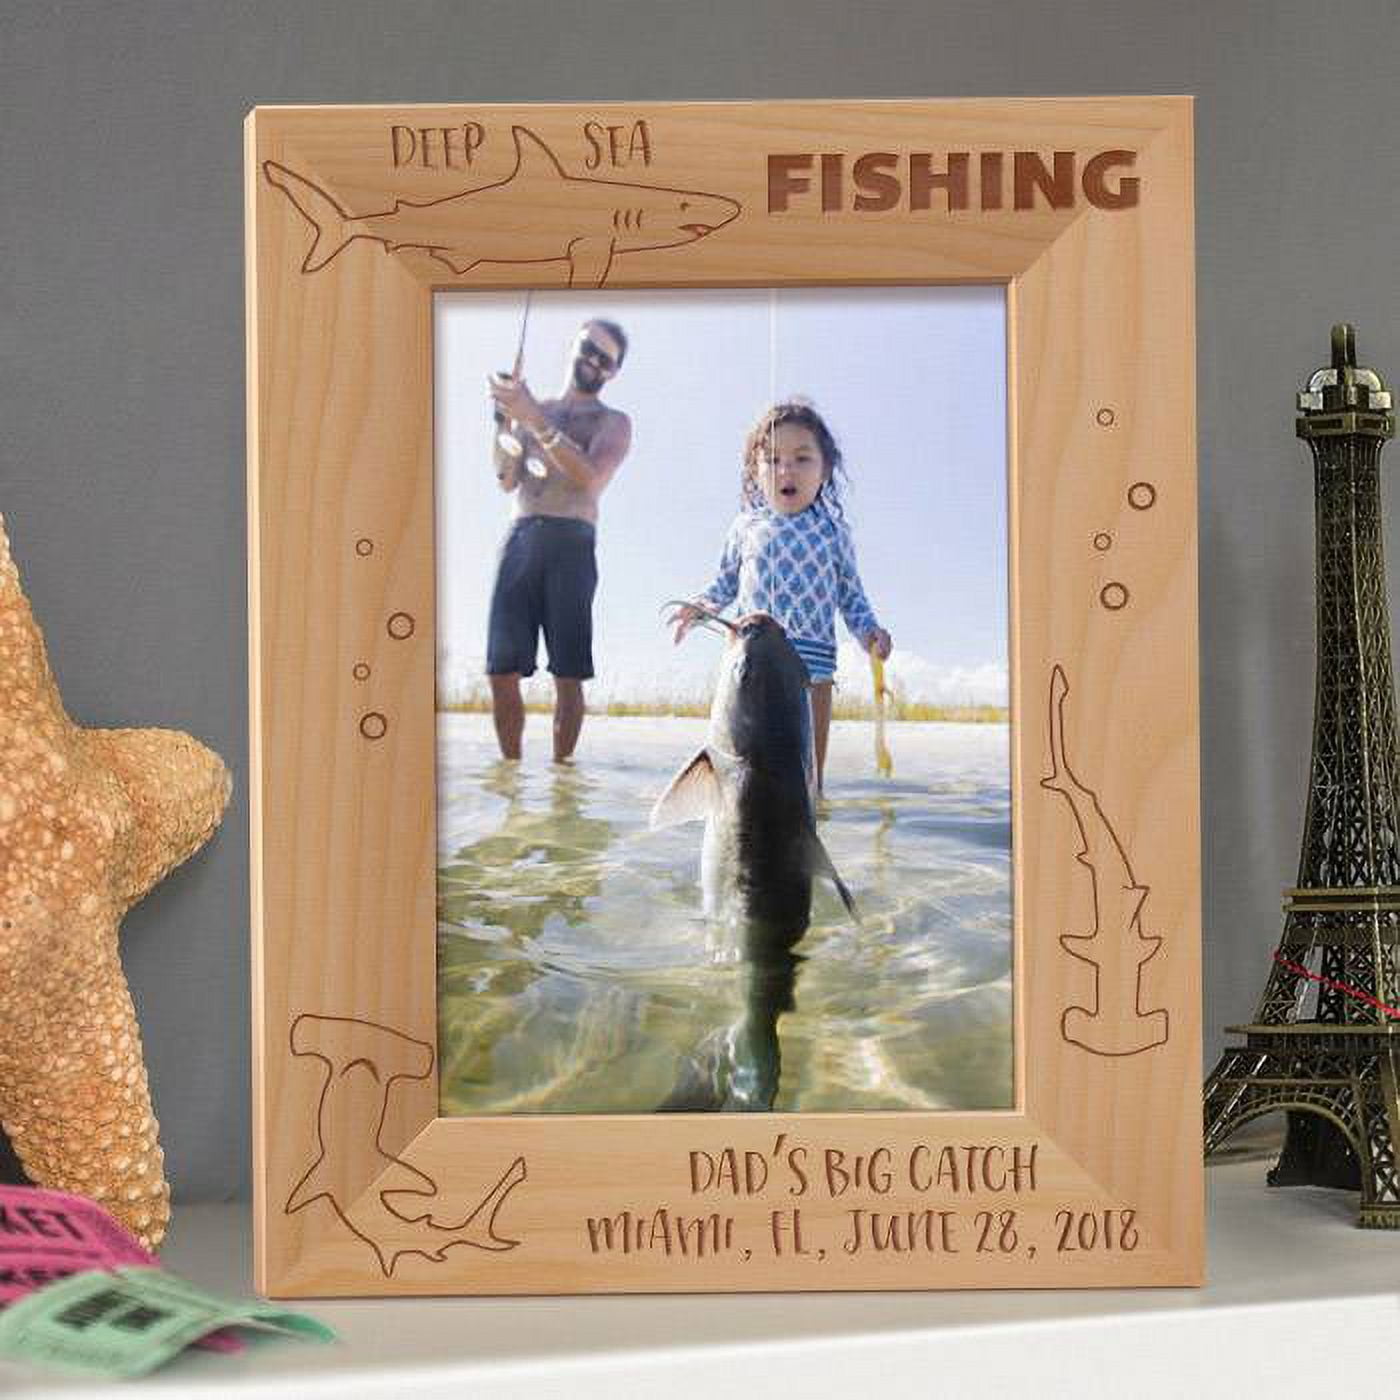 Deep Sea Fishing Personalized Wooden Picture Frame 5 x 7 Brown